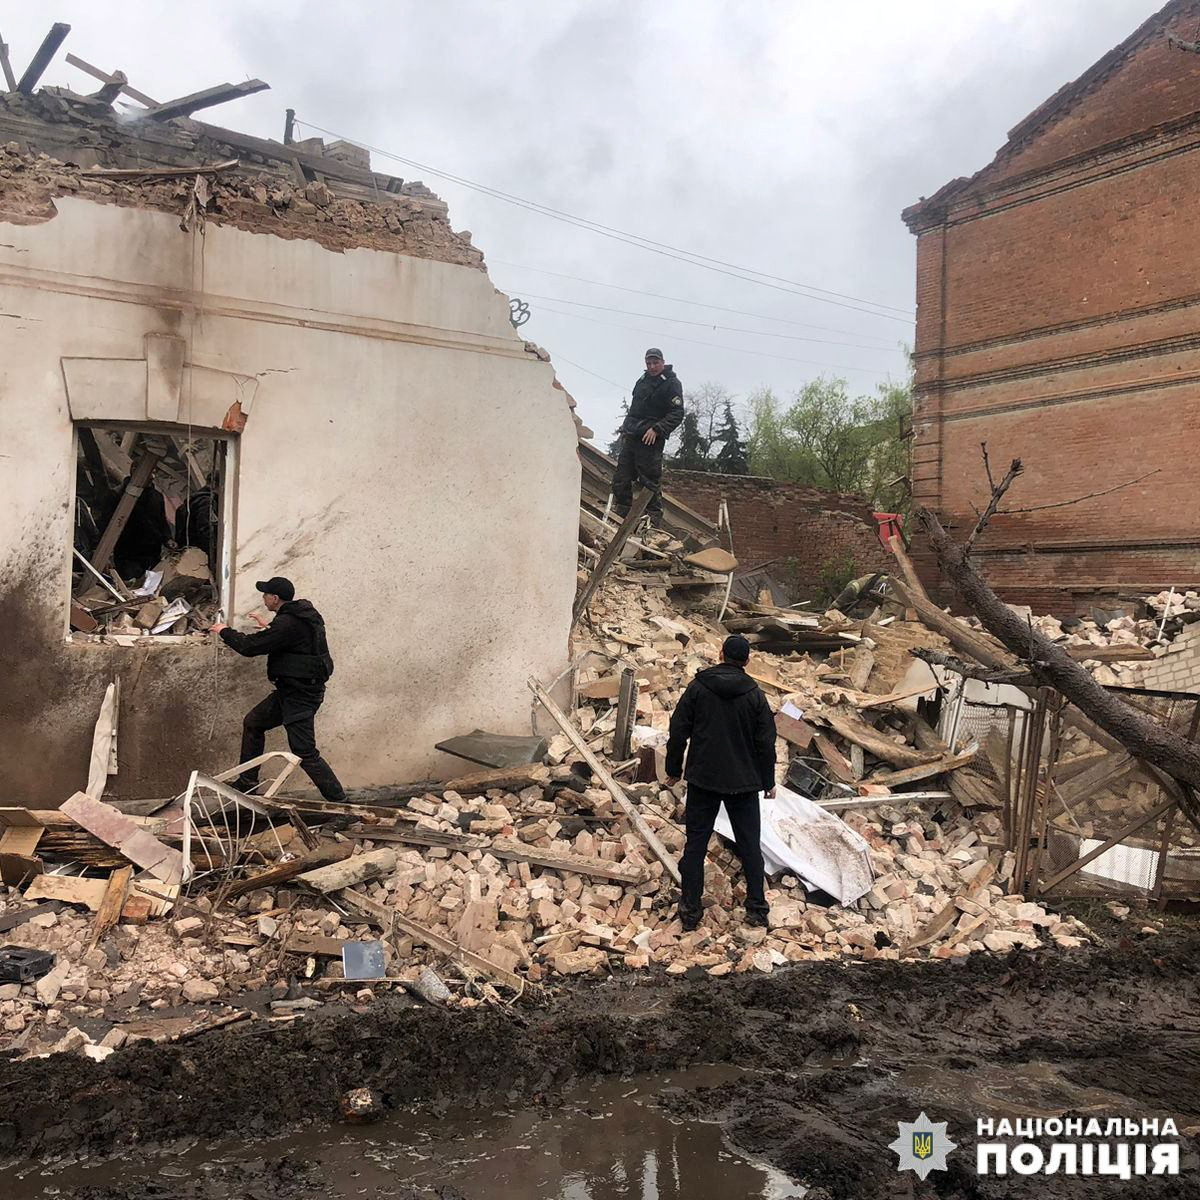 Police officers work at a site of a local museum heavily damaged by a Russian missile strike in the town of Kupiansk, Kharkiv region, Ukraine, on April 25.